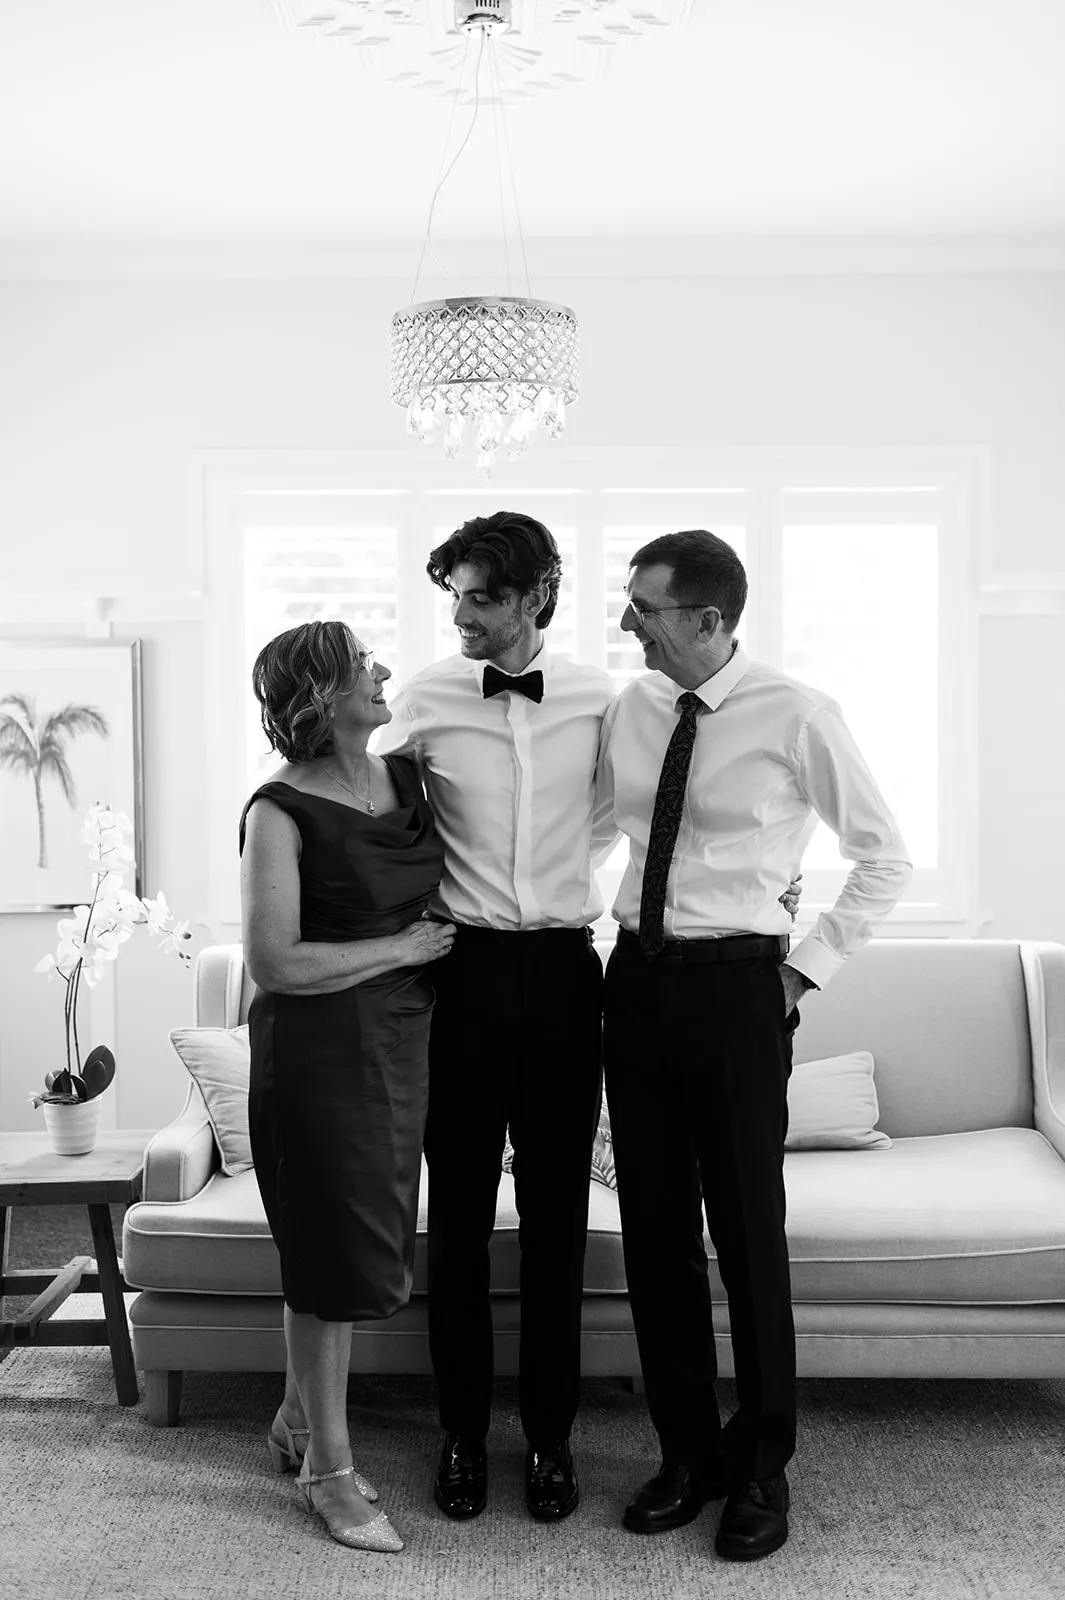 A black and white photo showing three people smiling and standing in front of a couch. The person in the middle is wearing a bow tie and suit, and is flanked by two older individuals, one on each side, each with an arm around the person's shoulders. A chandelier hangs above.